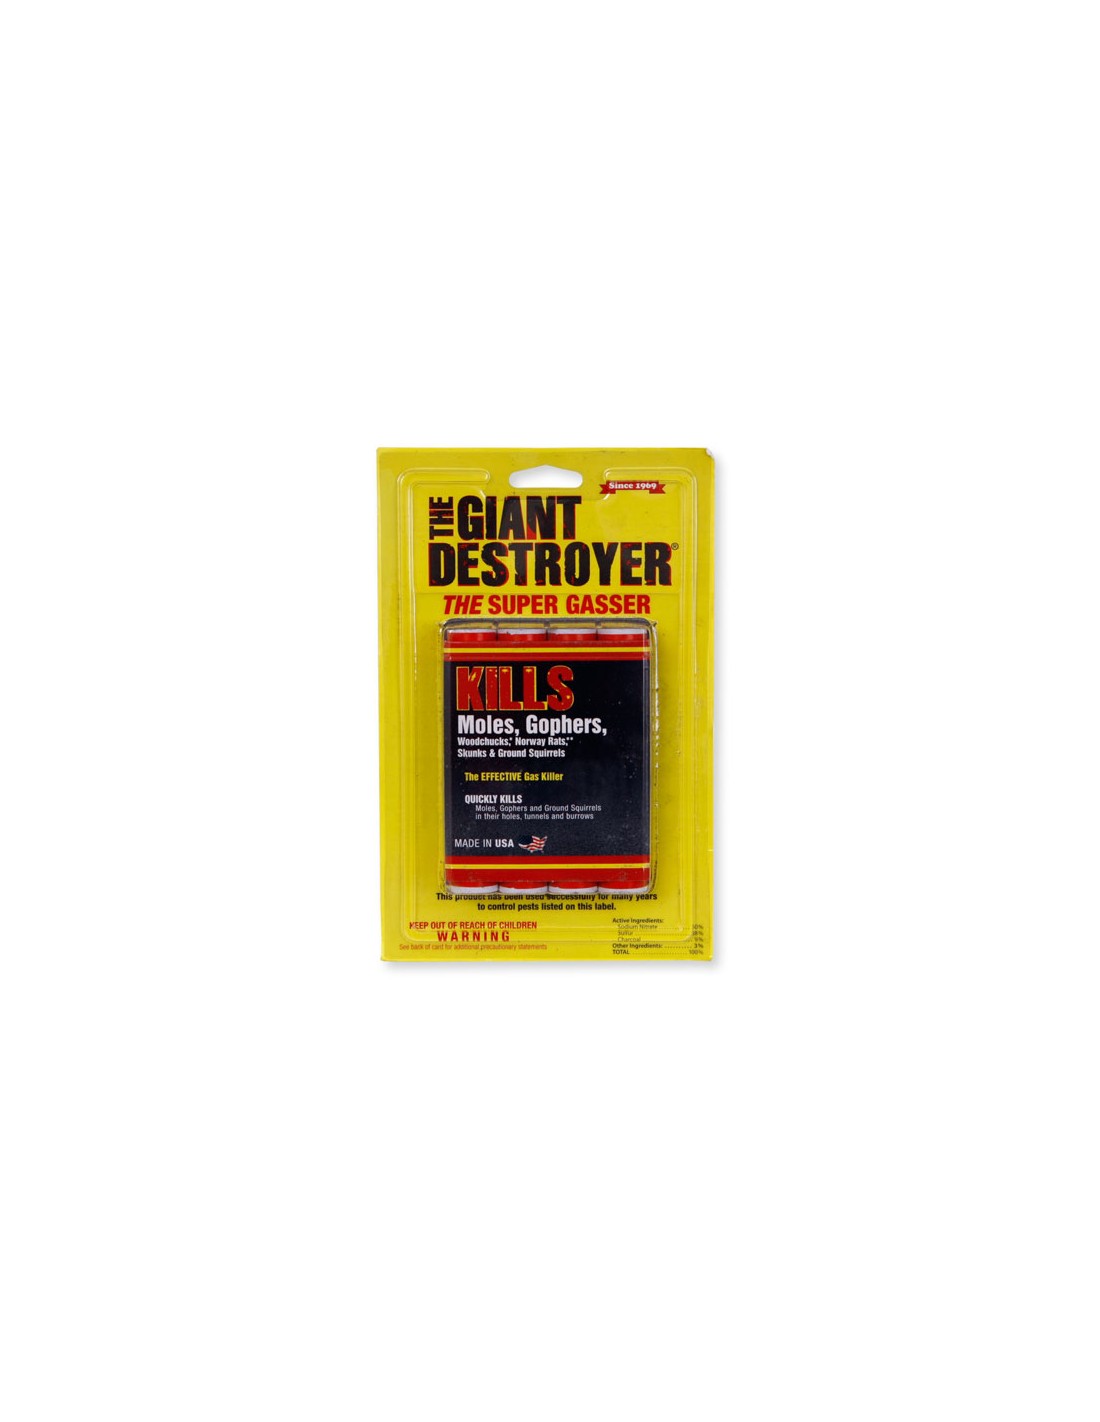 Can I try destroyer product for moles with guarantee if I buy it locally rather than online. Mank@rocketwire.net